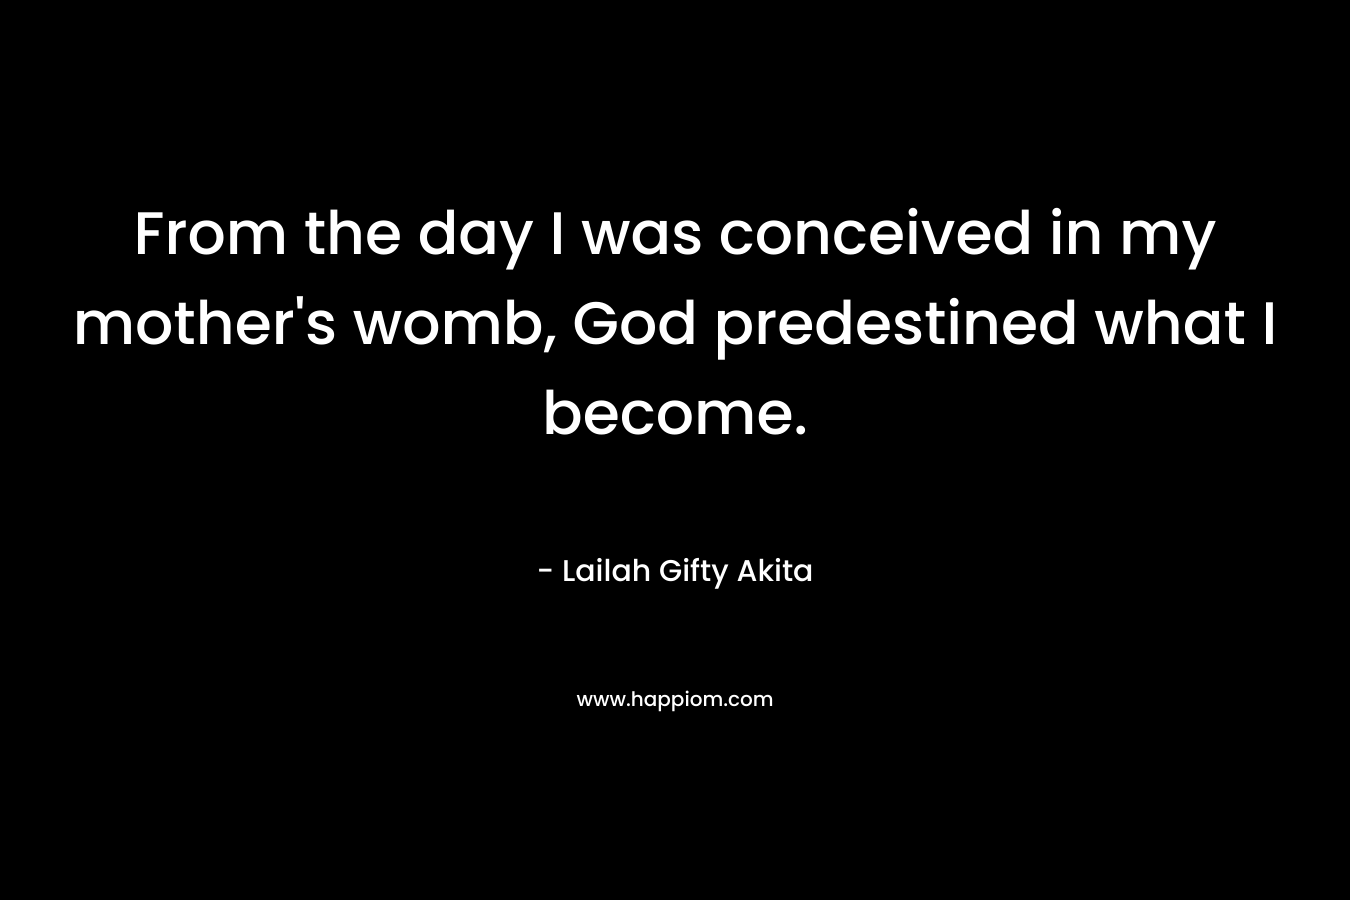 From the day I was conceived in my mother's womb, God predestined what I become.